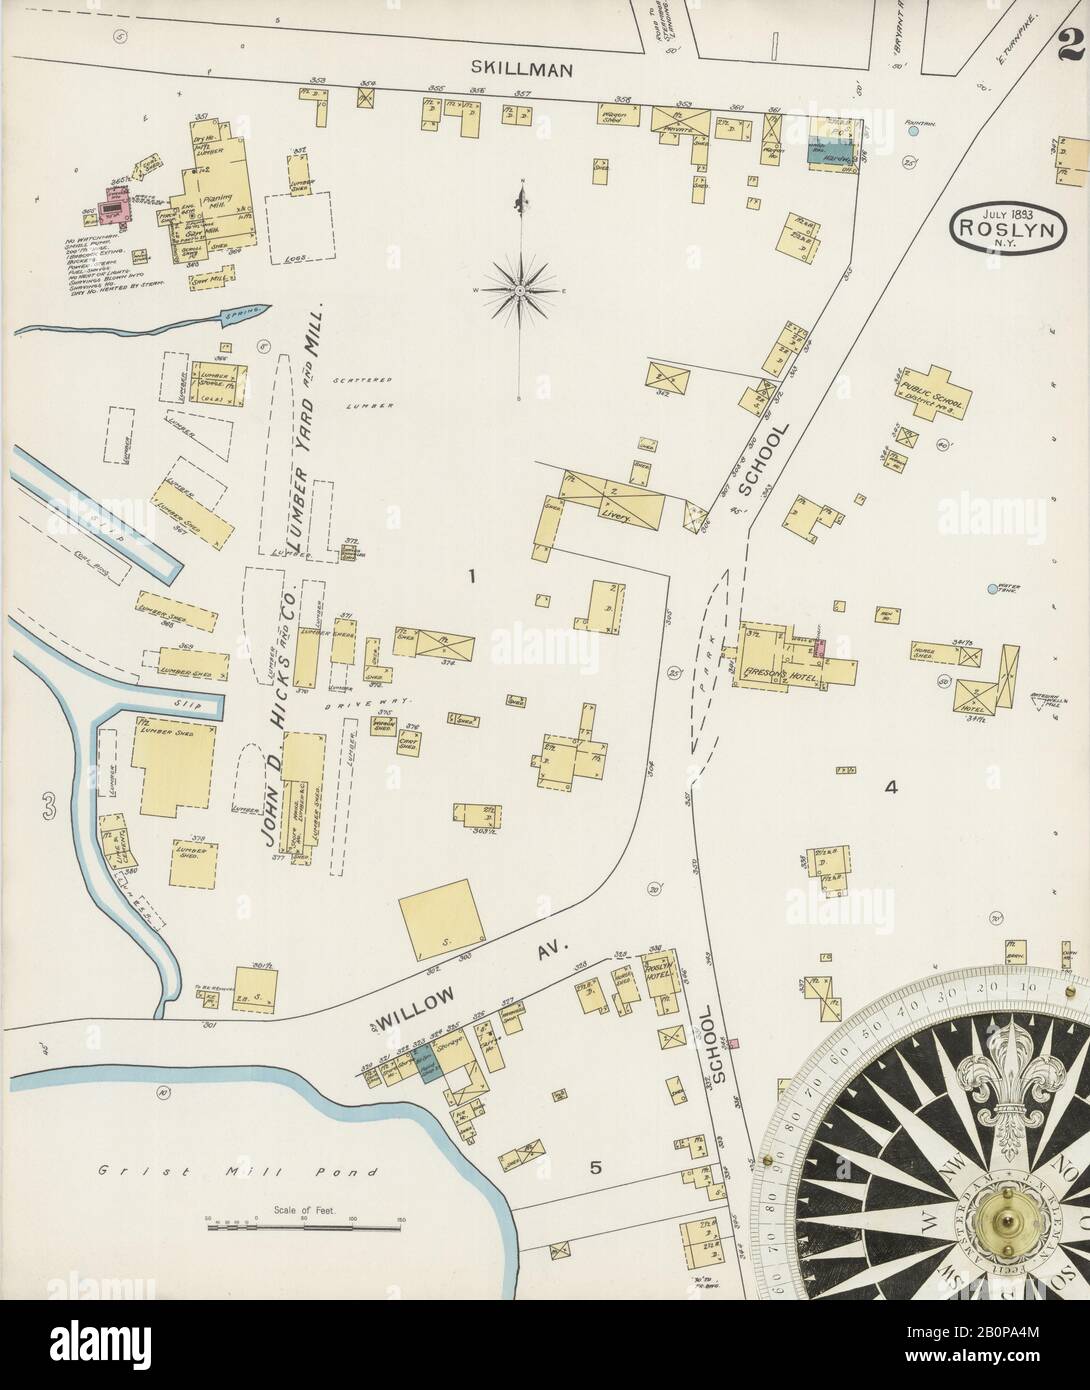 Image 2 of Sanborn Fire Insurance Map from Roslyn, Nassau County, New York. Jul 1893. 3 Sheet(s), America, street map with a Nineteenth Century compass Stock Photo